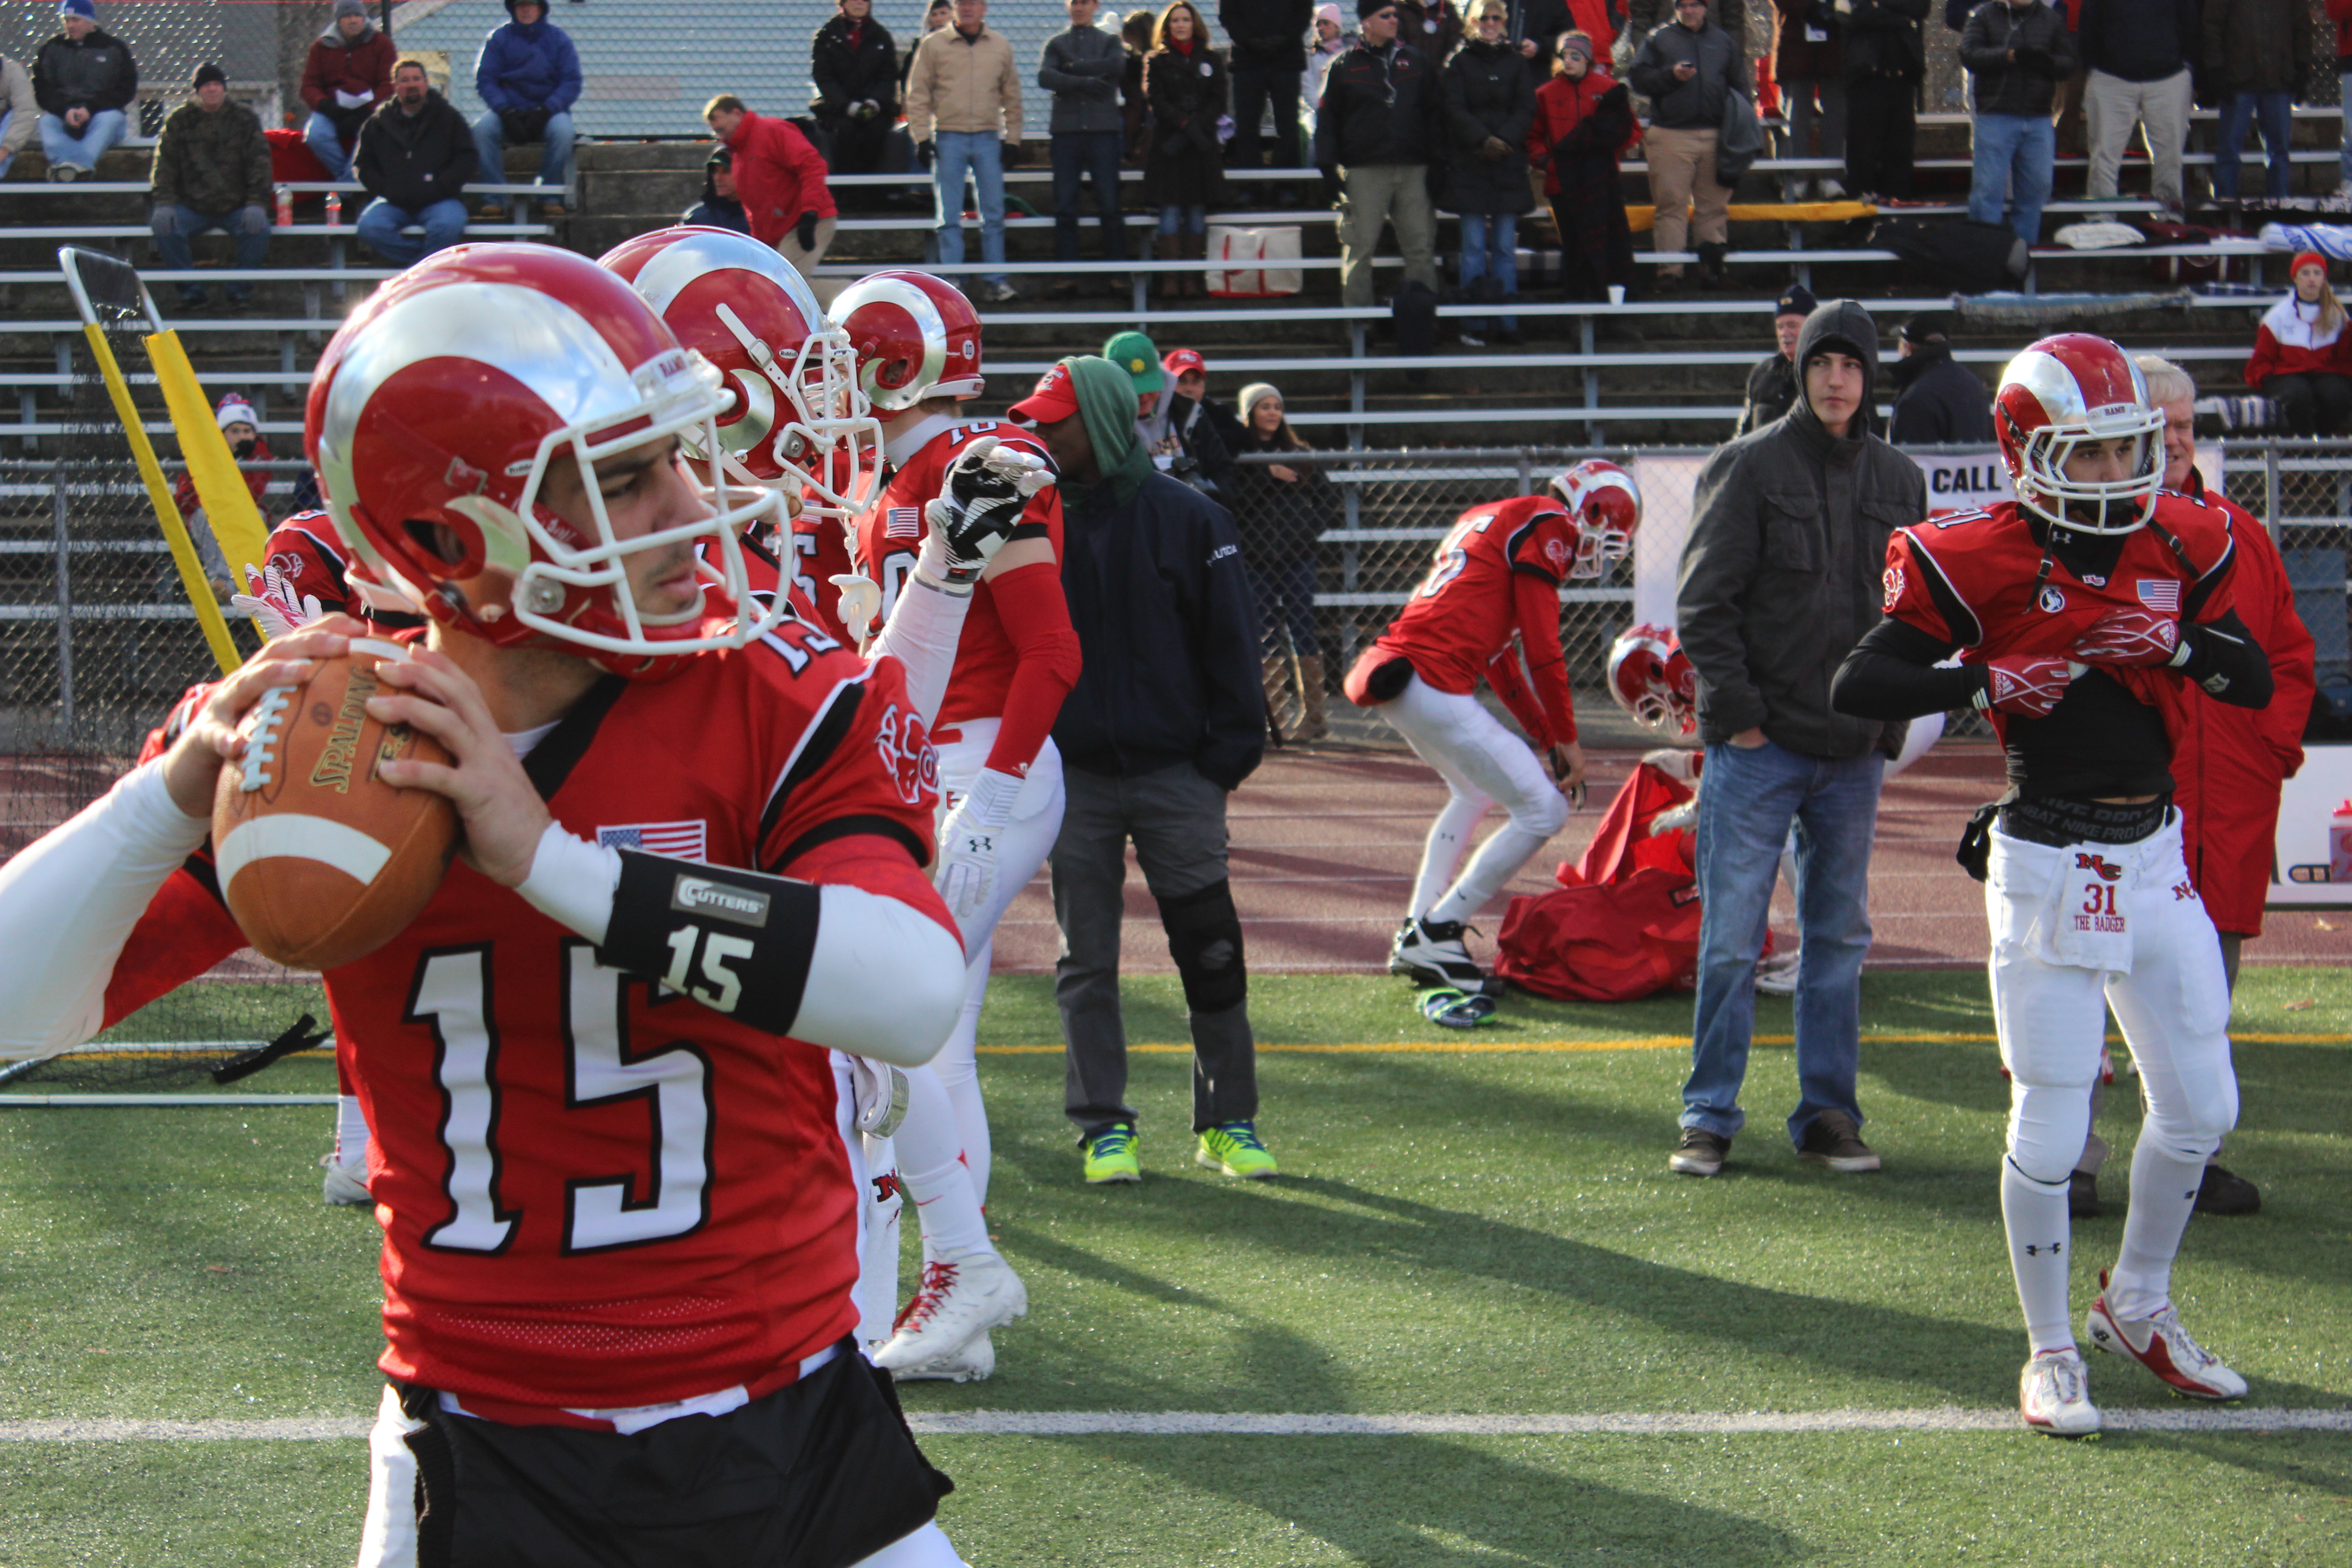 QB Nick Cascione will be playing up the road at Sacred Heart.